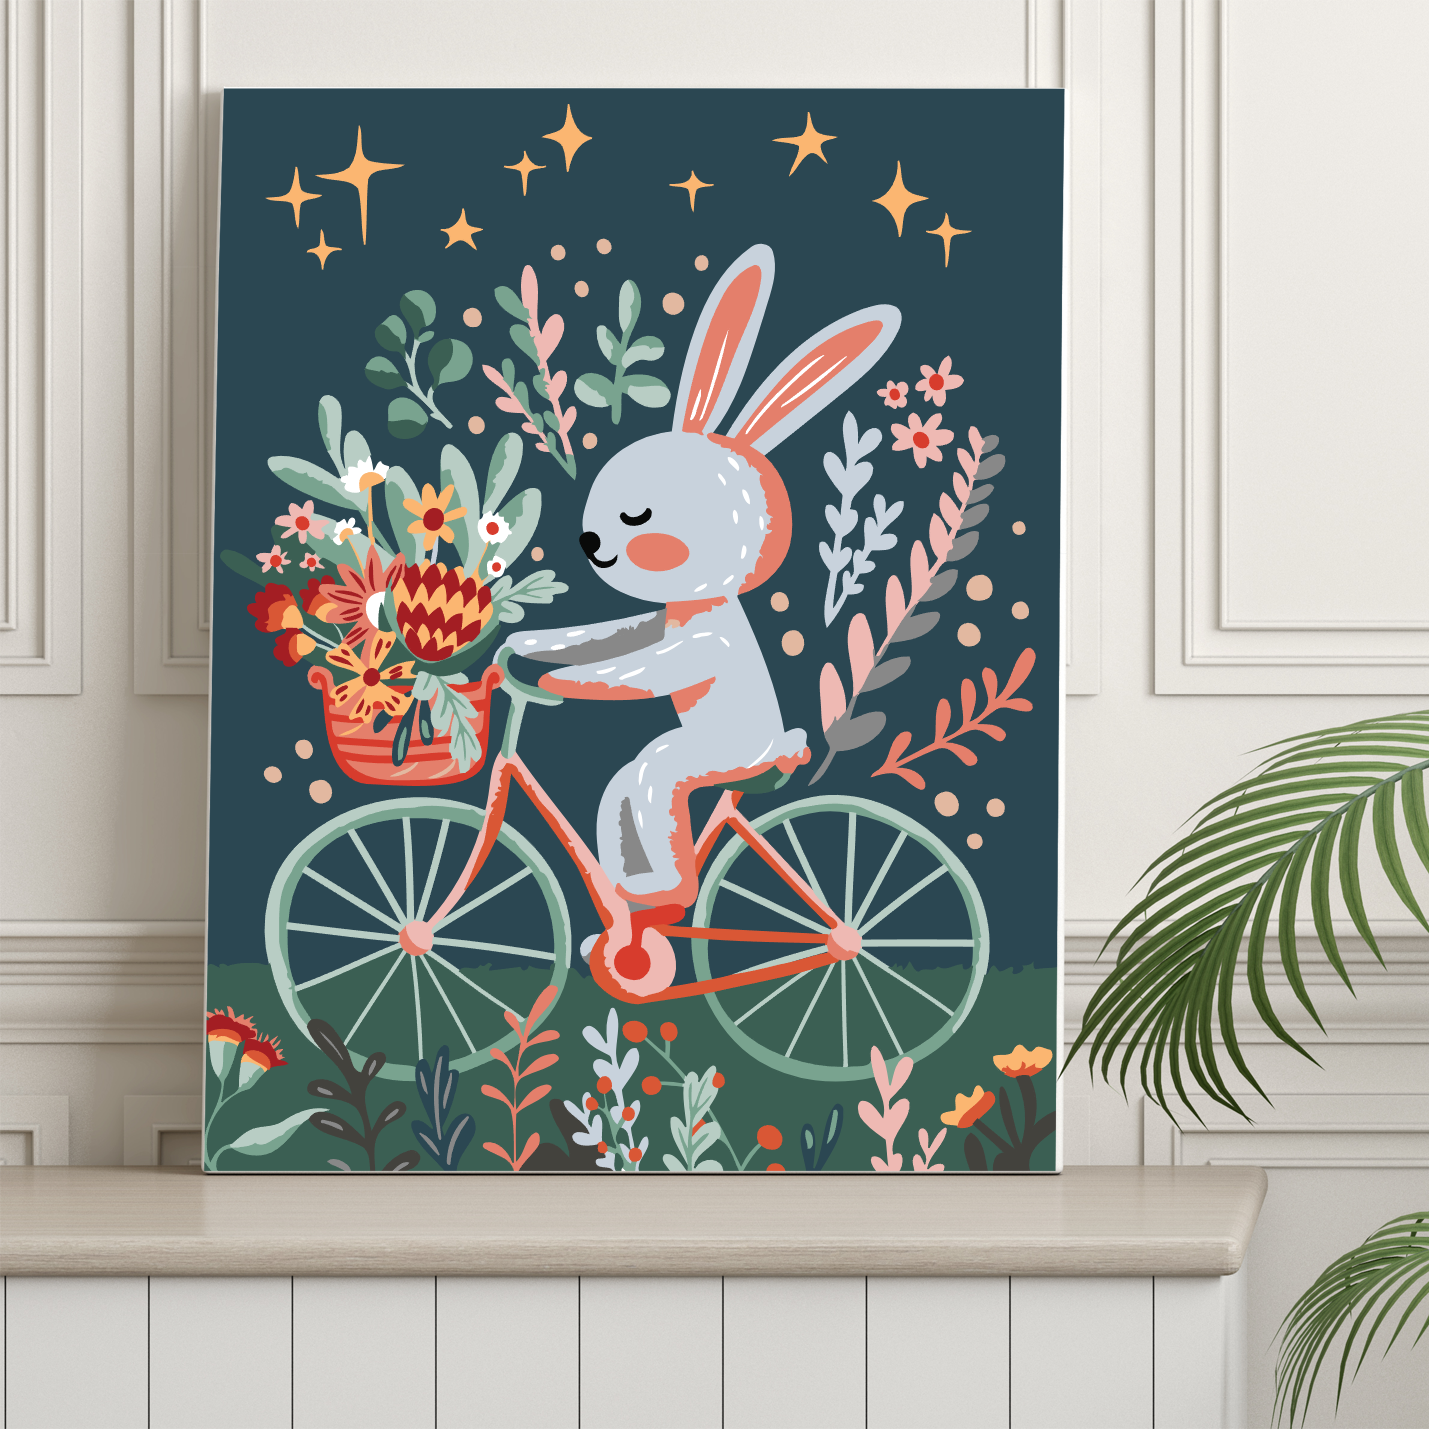 40x50cm Paint by Numbers Kit: Whimsical Wheels - Rabbit's Floral Joy Ride